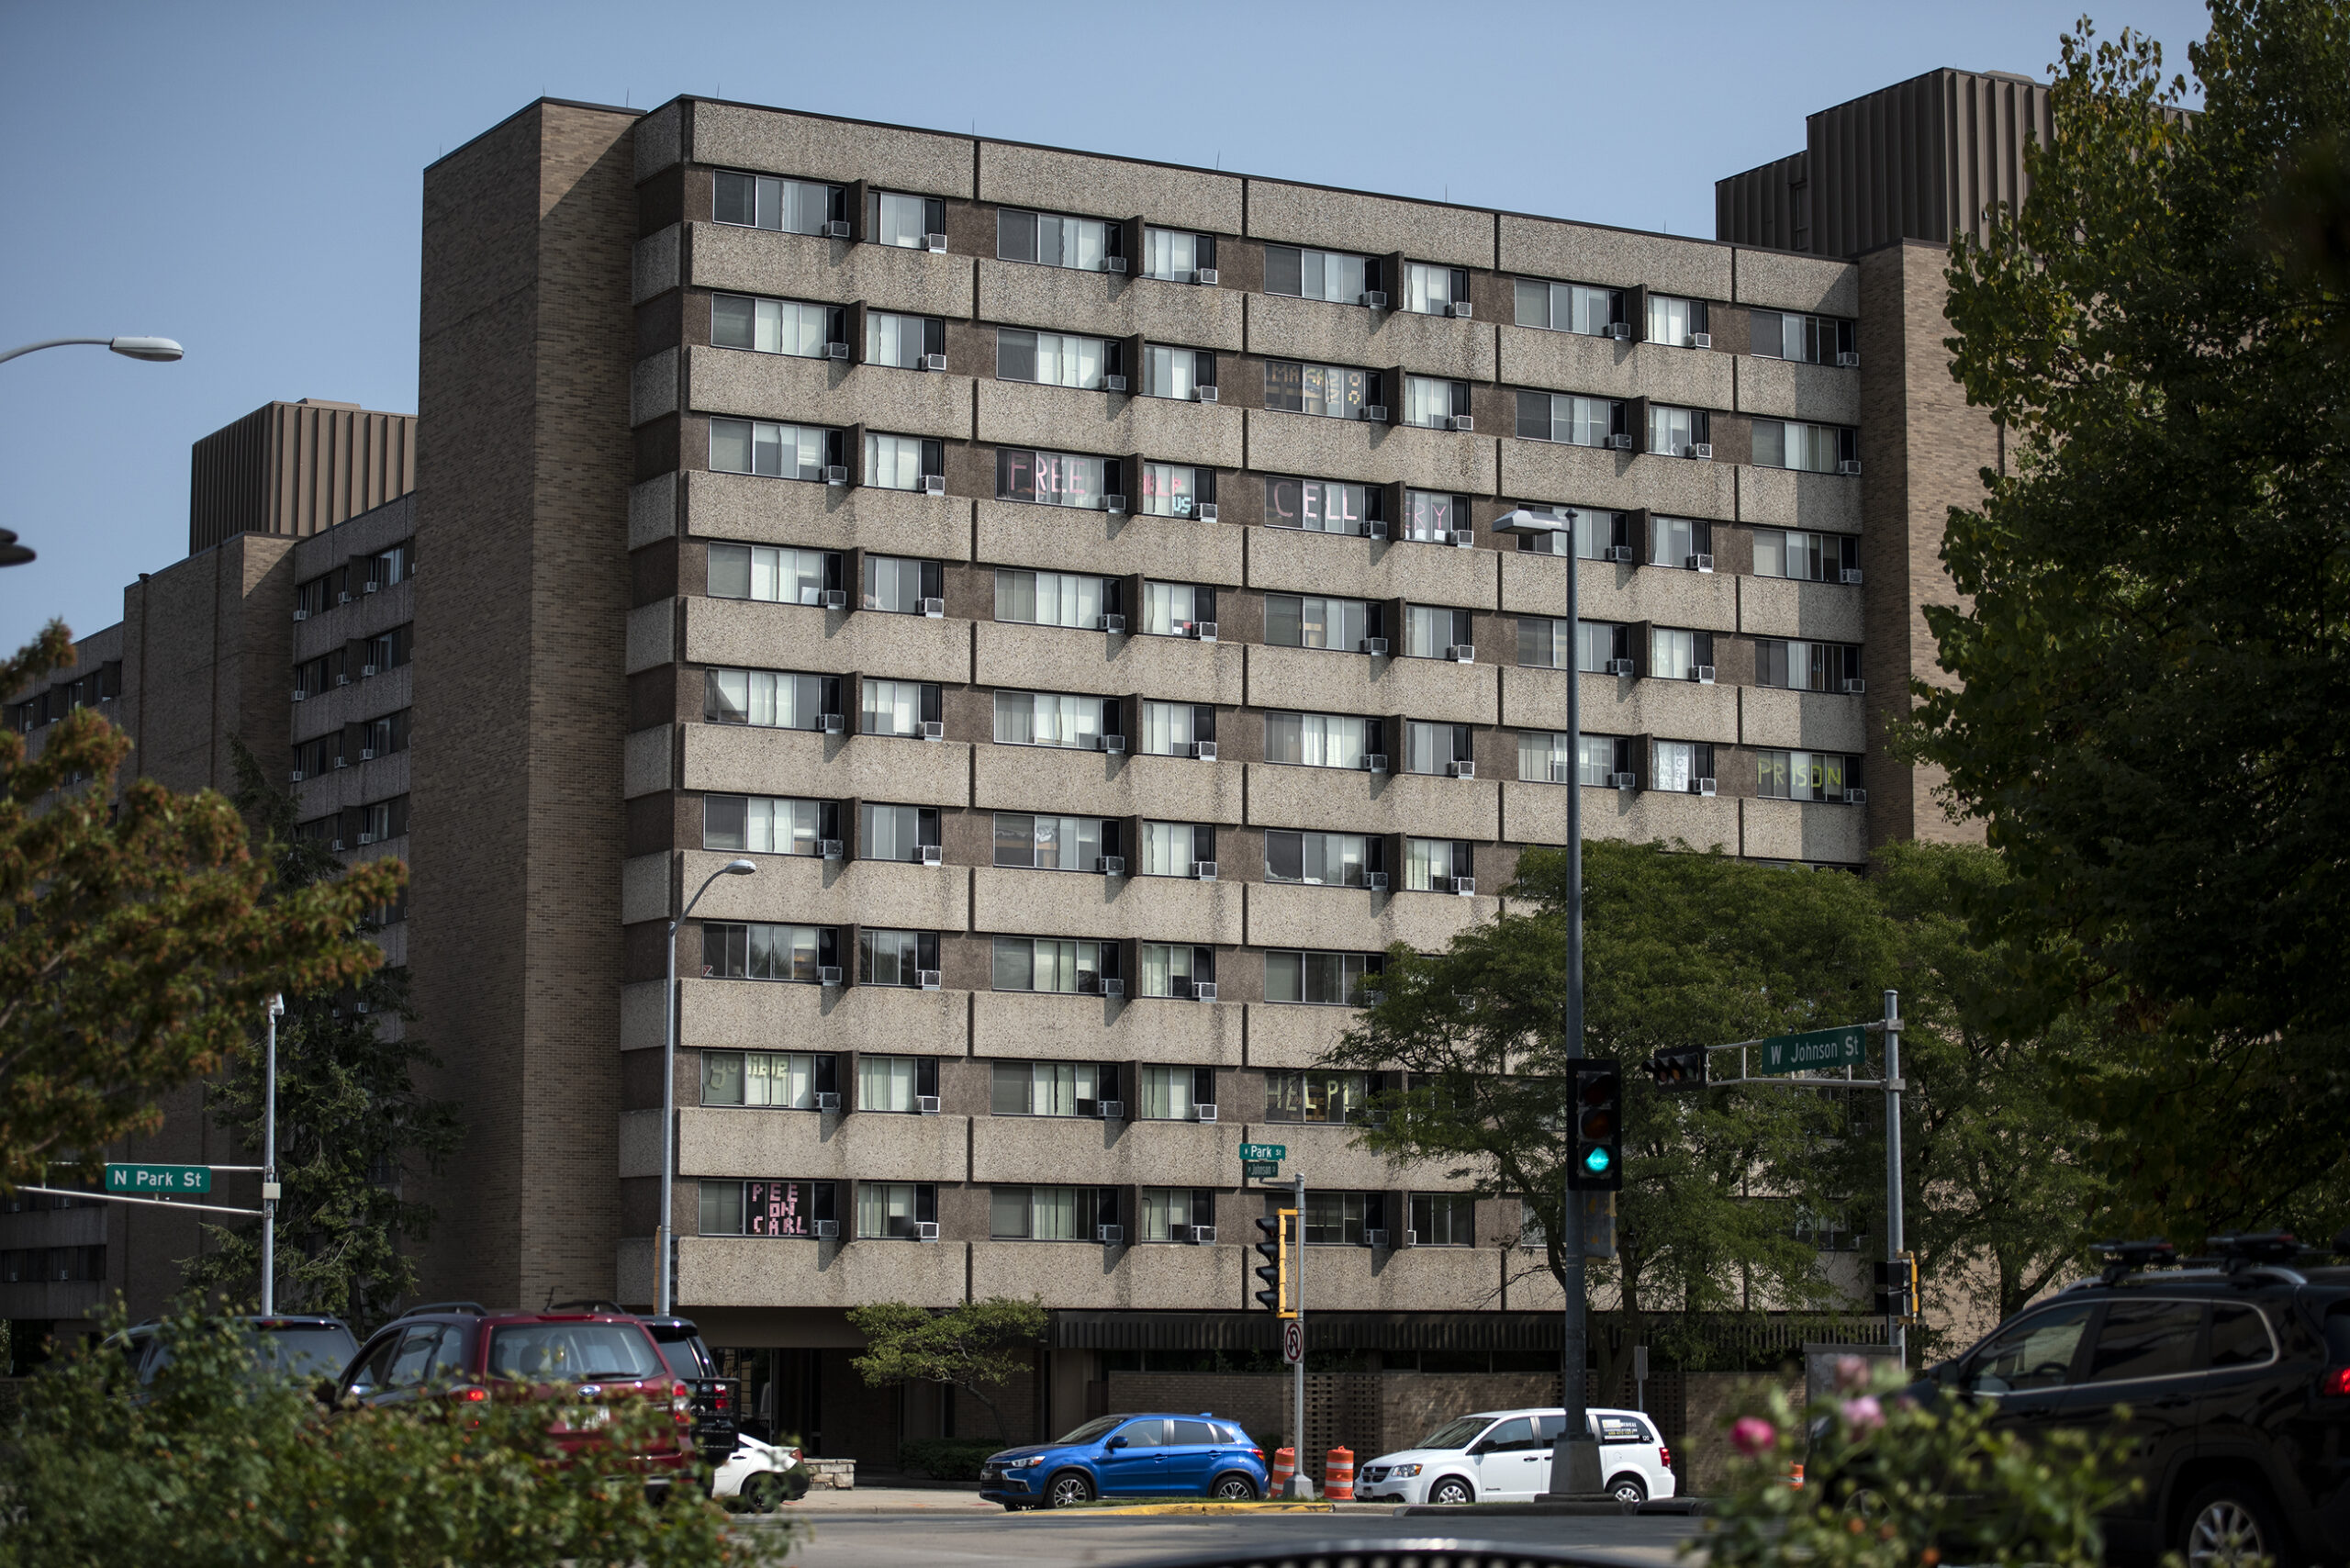 CDC Study Shows COVID-19 Outbreak At UW-Madison Dorms Didn’t Spill Into Surrounding Community